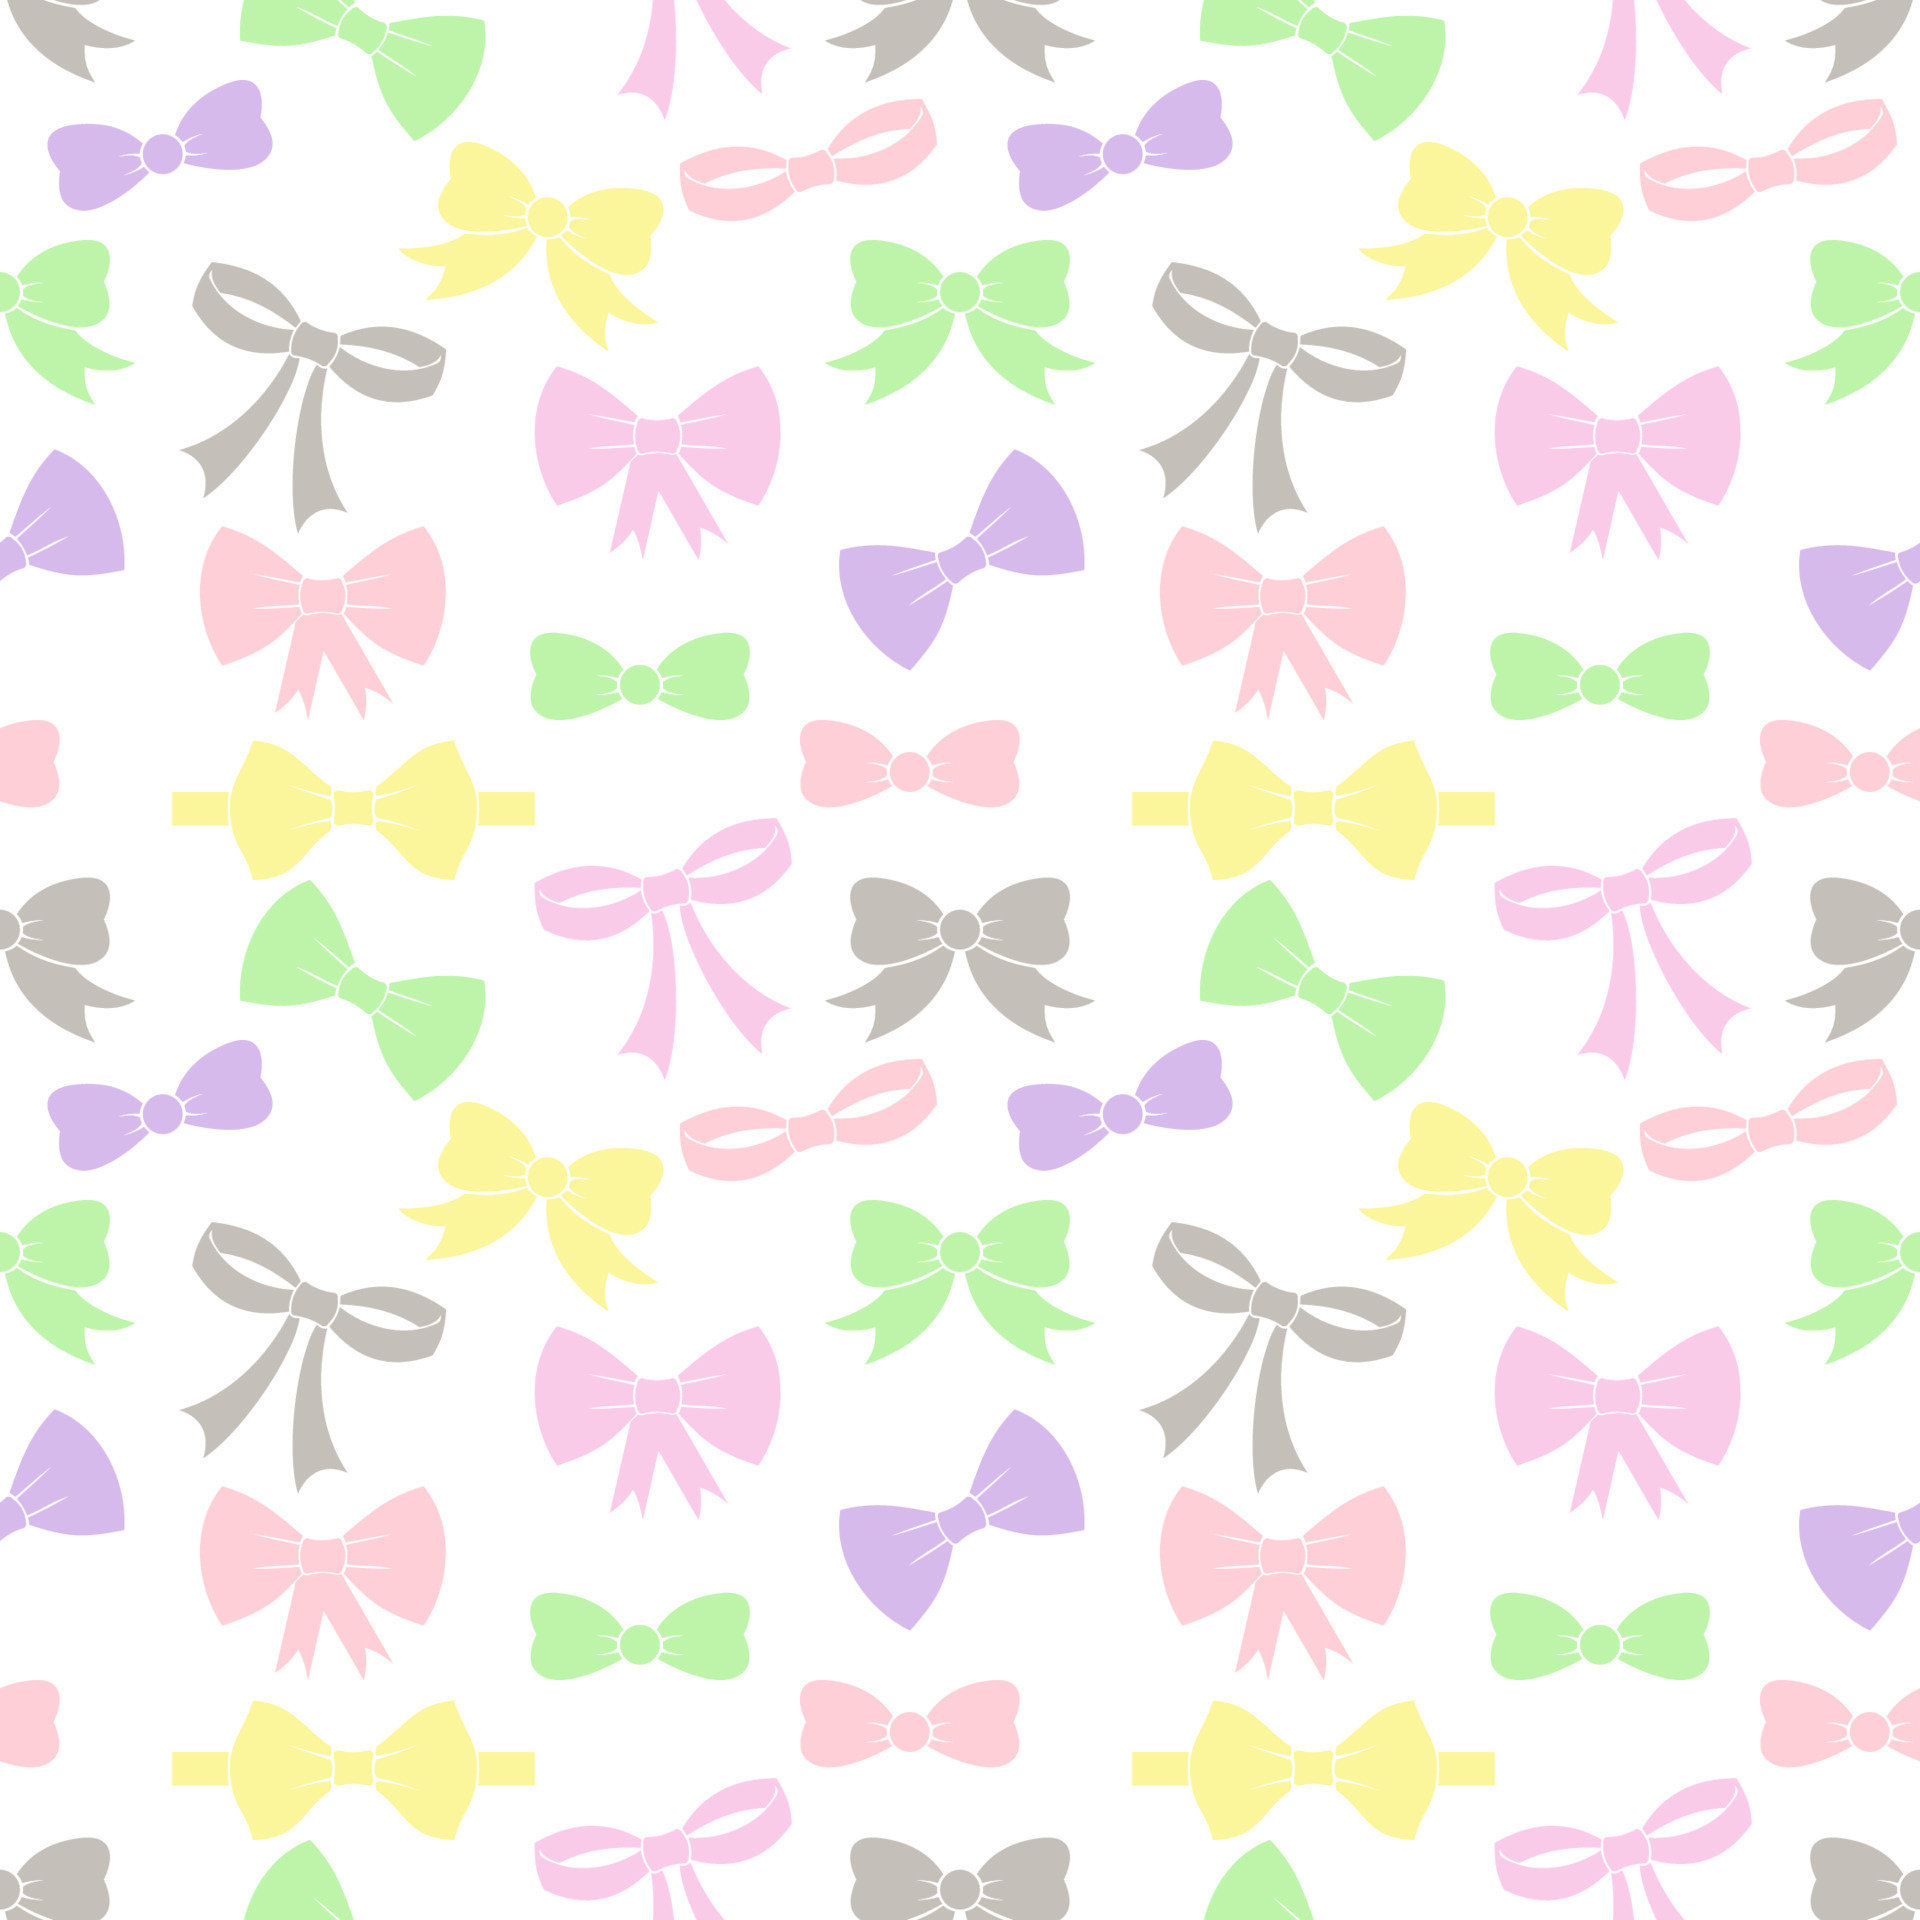 Very beautiful seamless pattern design for decorating, wallpaper ...